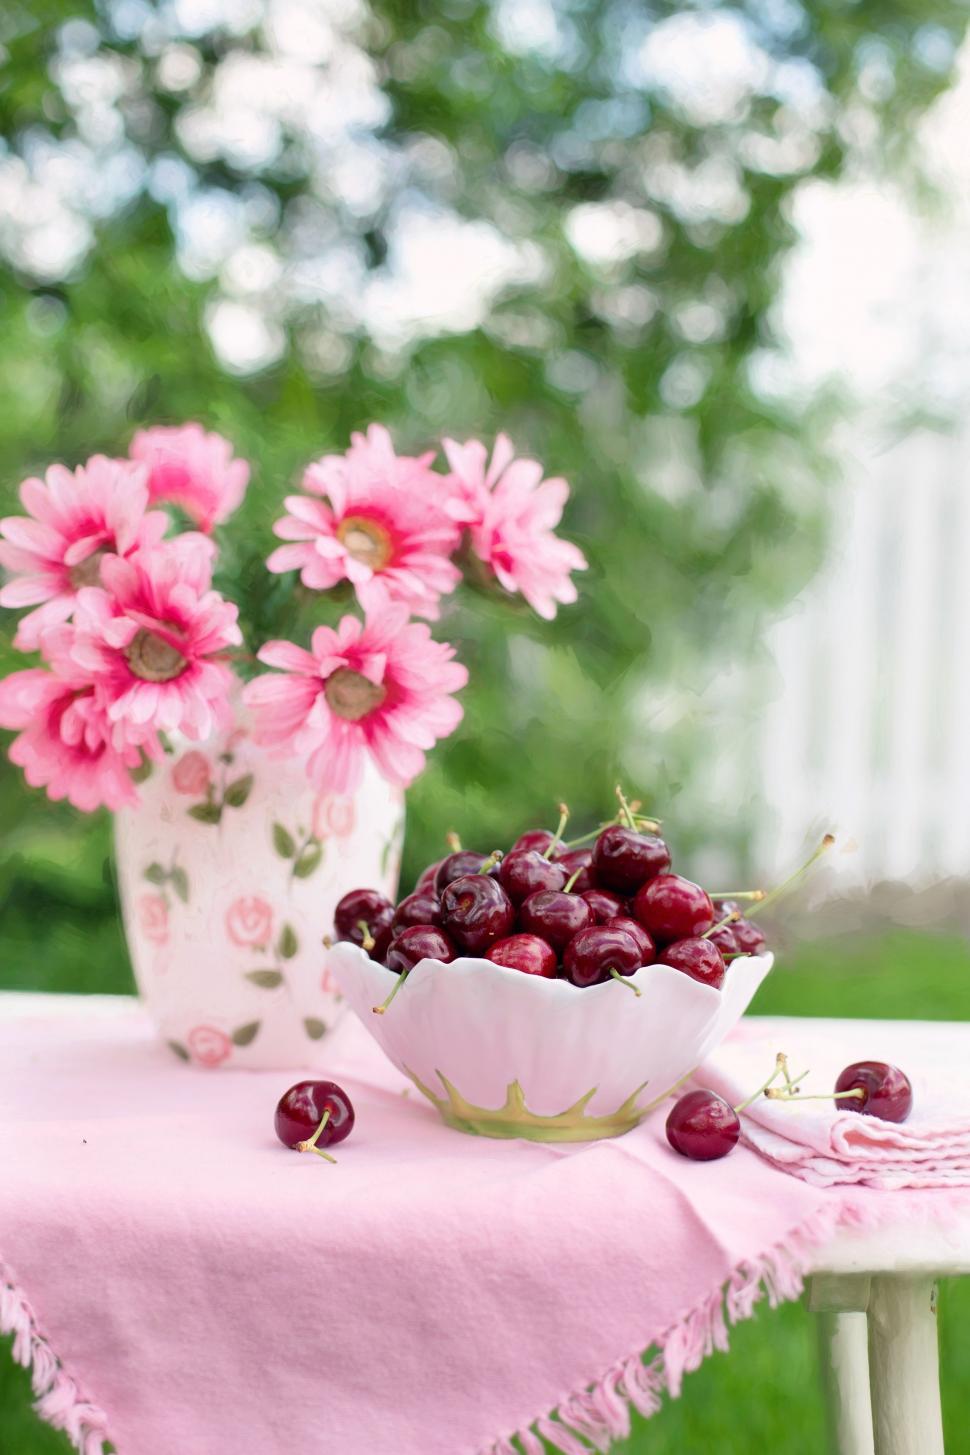 Free Image of Cherries and flowers  